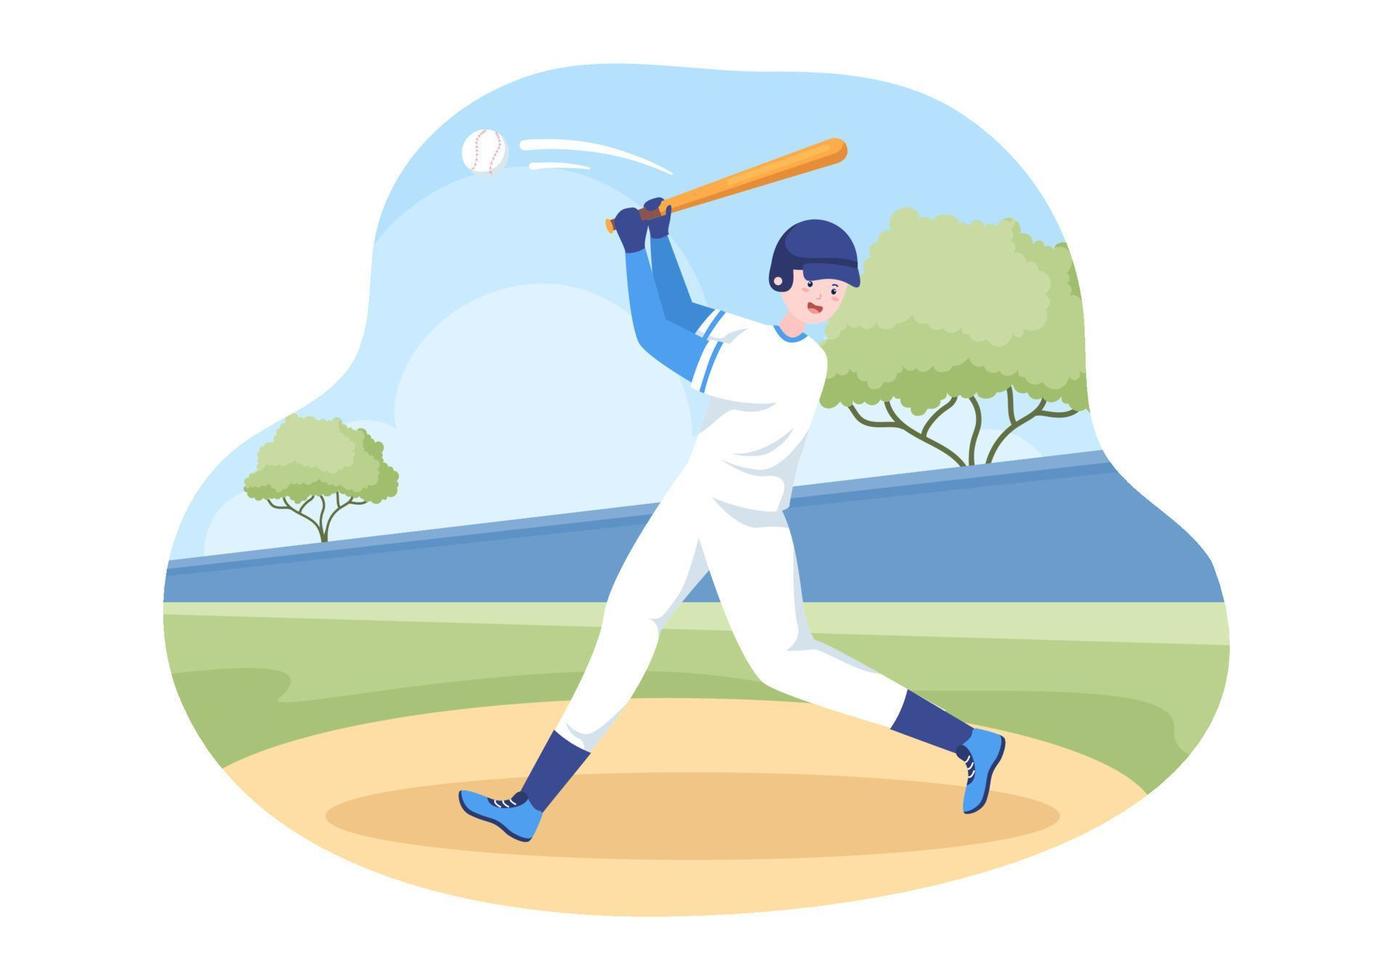 Baseball Player Sports Throwing, Catching or Hitting a Ball with Bats and Gloves Wearing Uniform on Court Stadium in Flat Cartoon Illustration vector